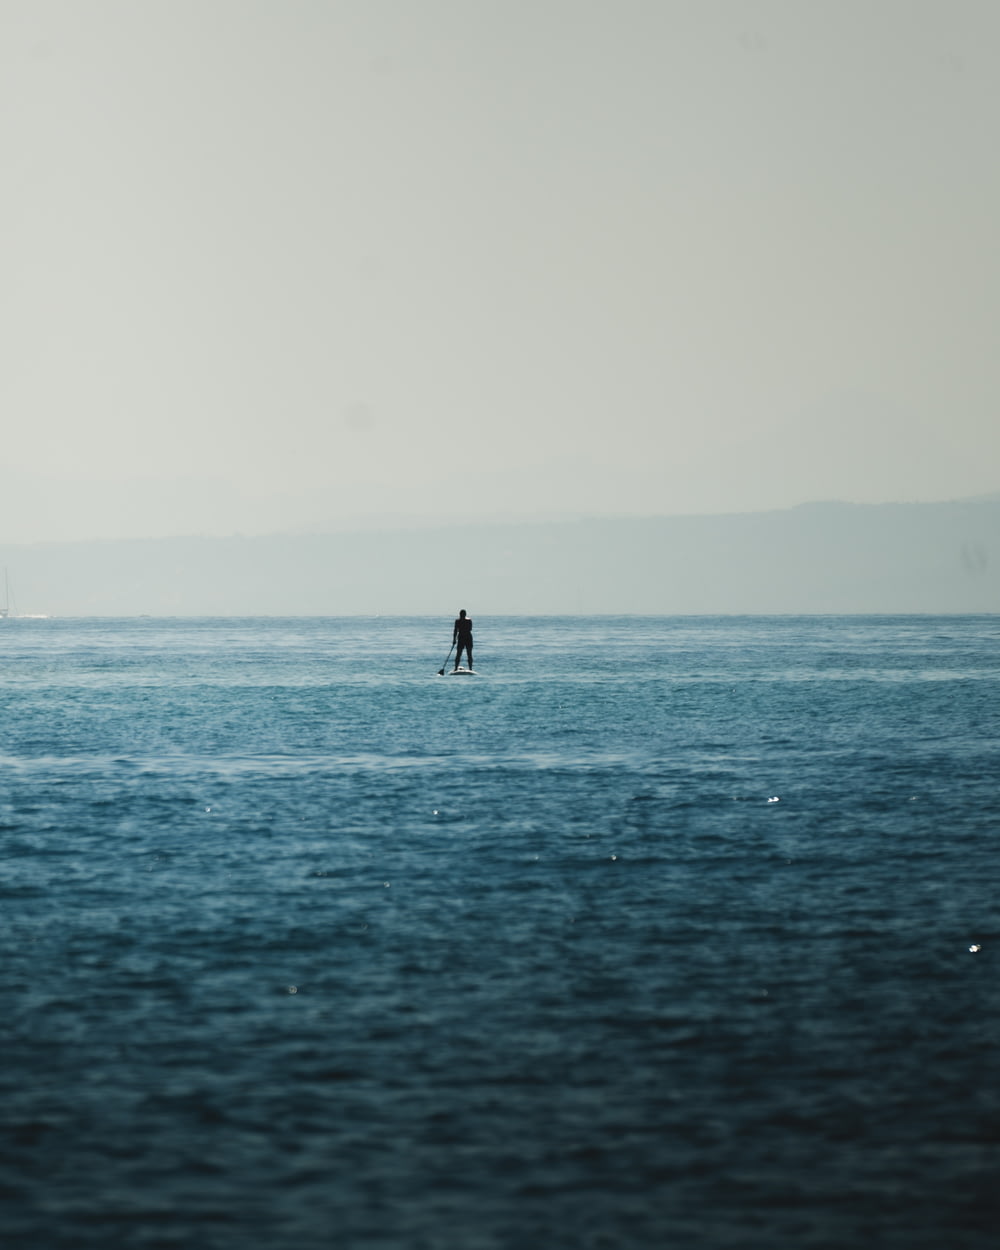 a person standing on a surfboard in the middle of the ocean